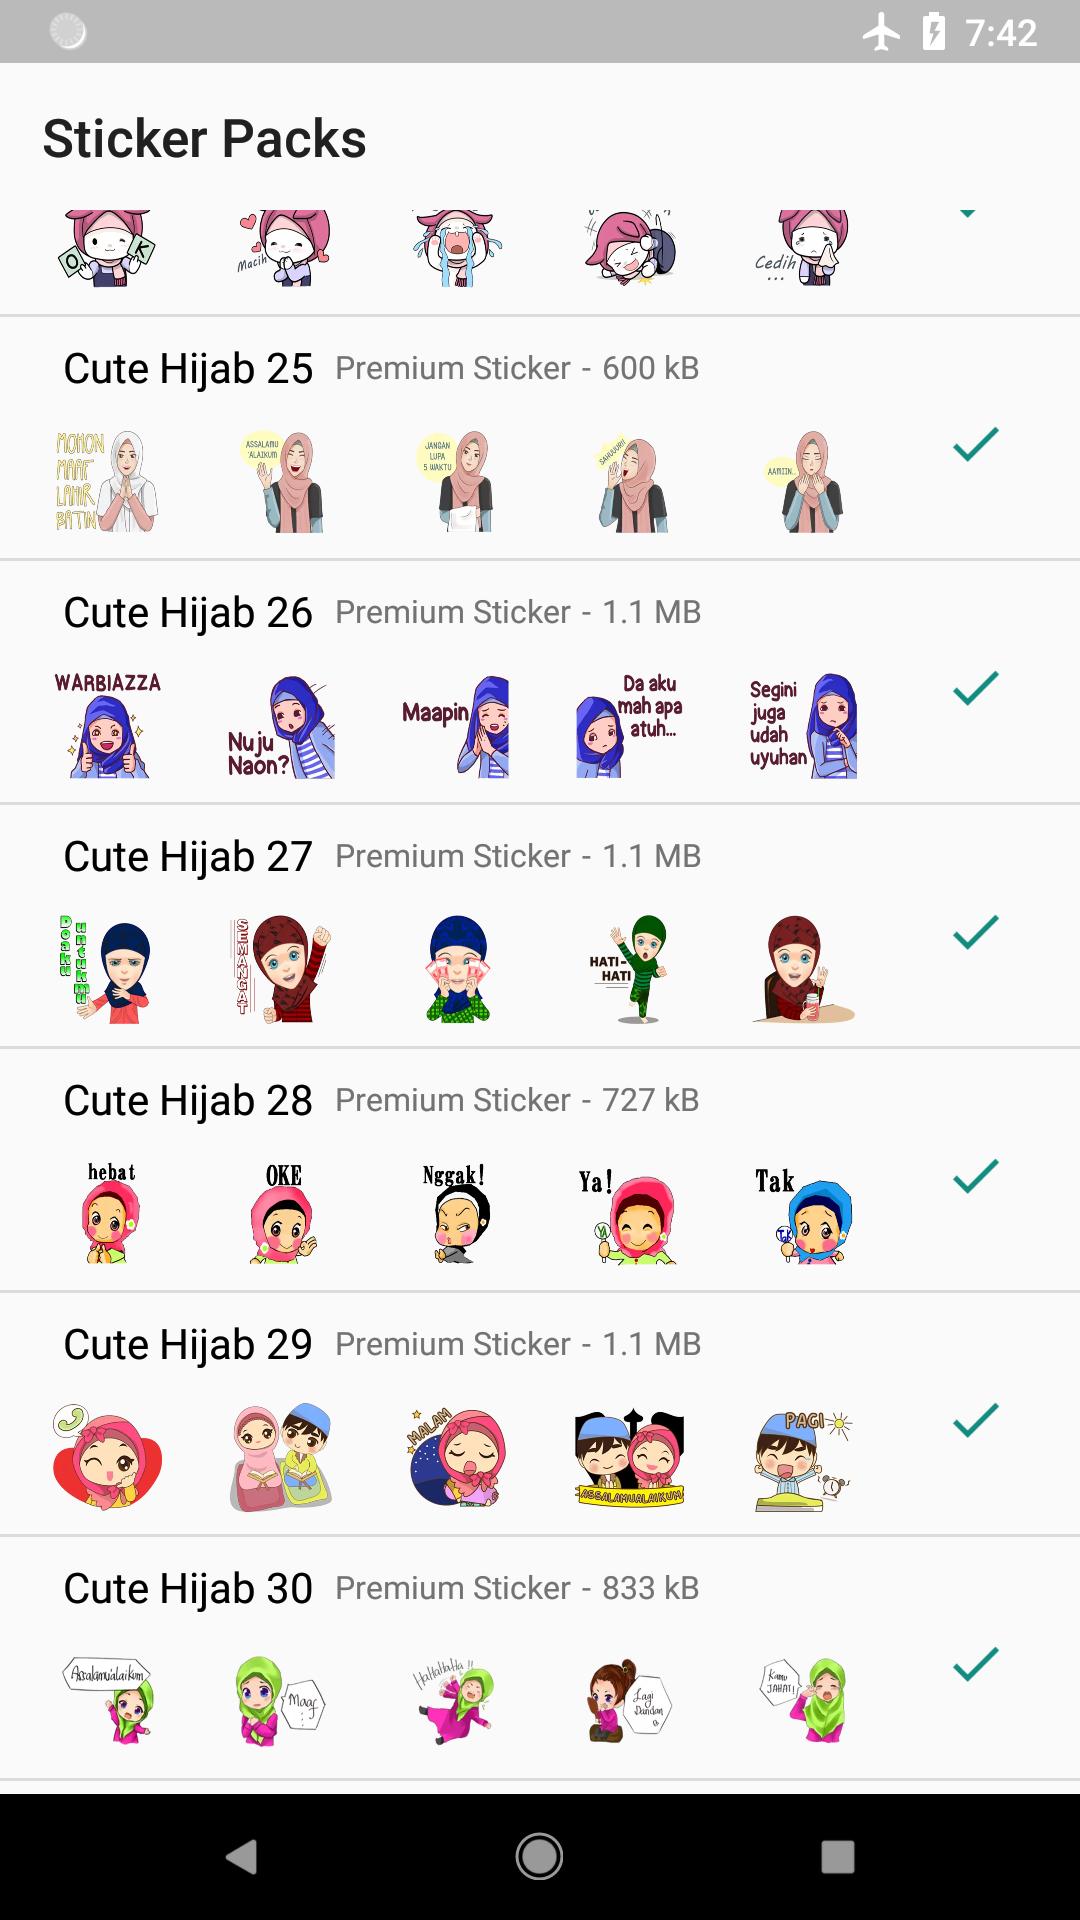 Sticker Hijab Cewek Cantik Wastickerapps For Android Apk Download